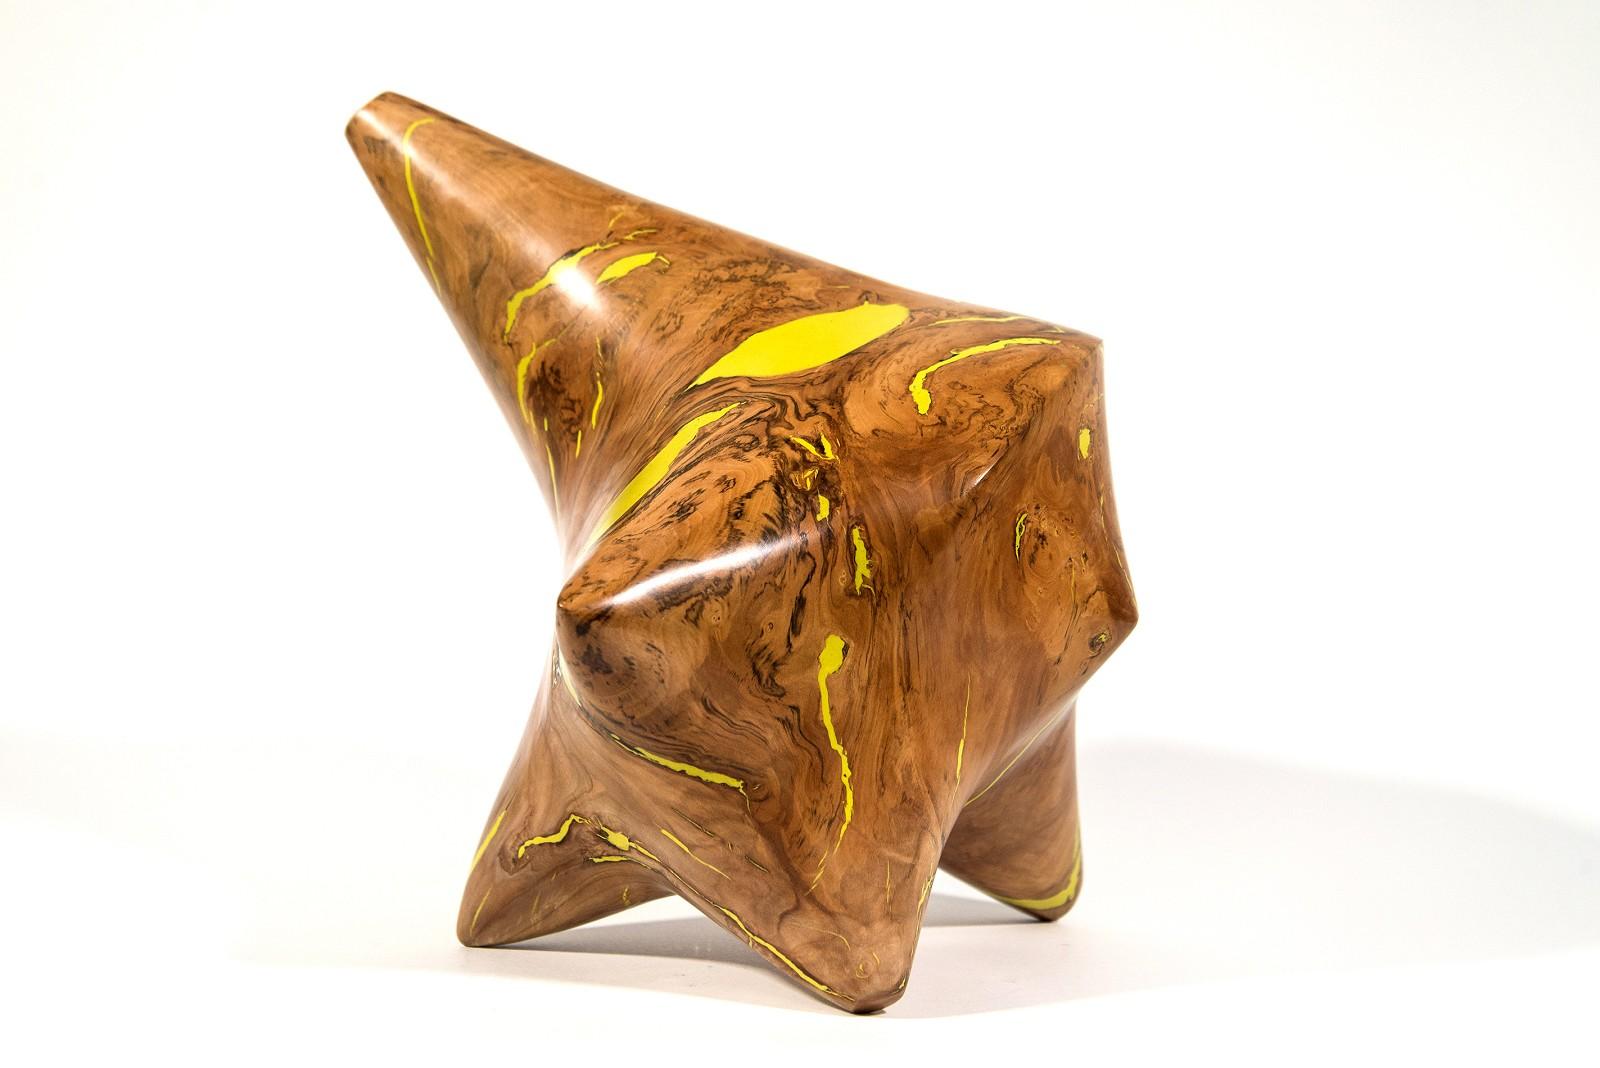 Windfall Series II No 7 - smooth, carved, abstract, Applewood & resin sculpture - Contemporary Sculpture by Shayne Dark